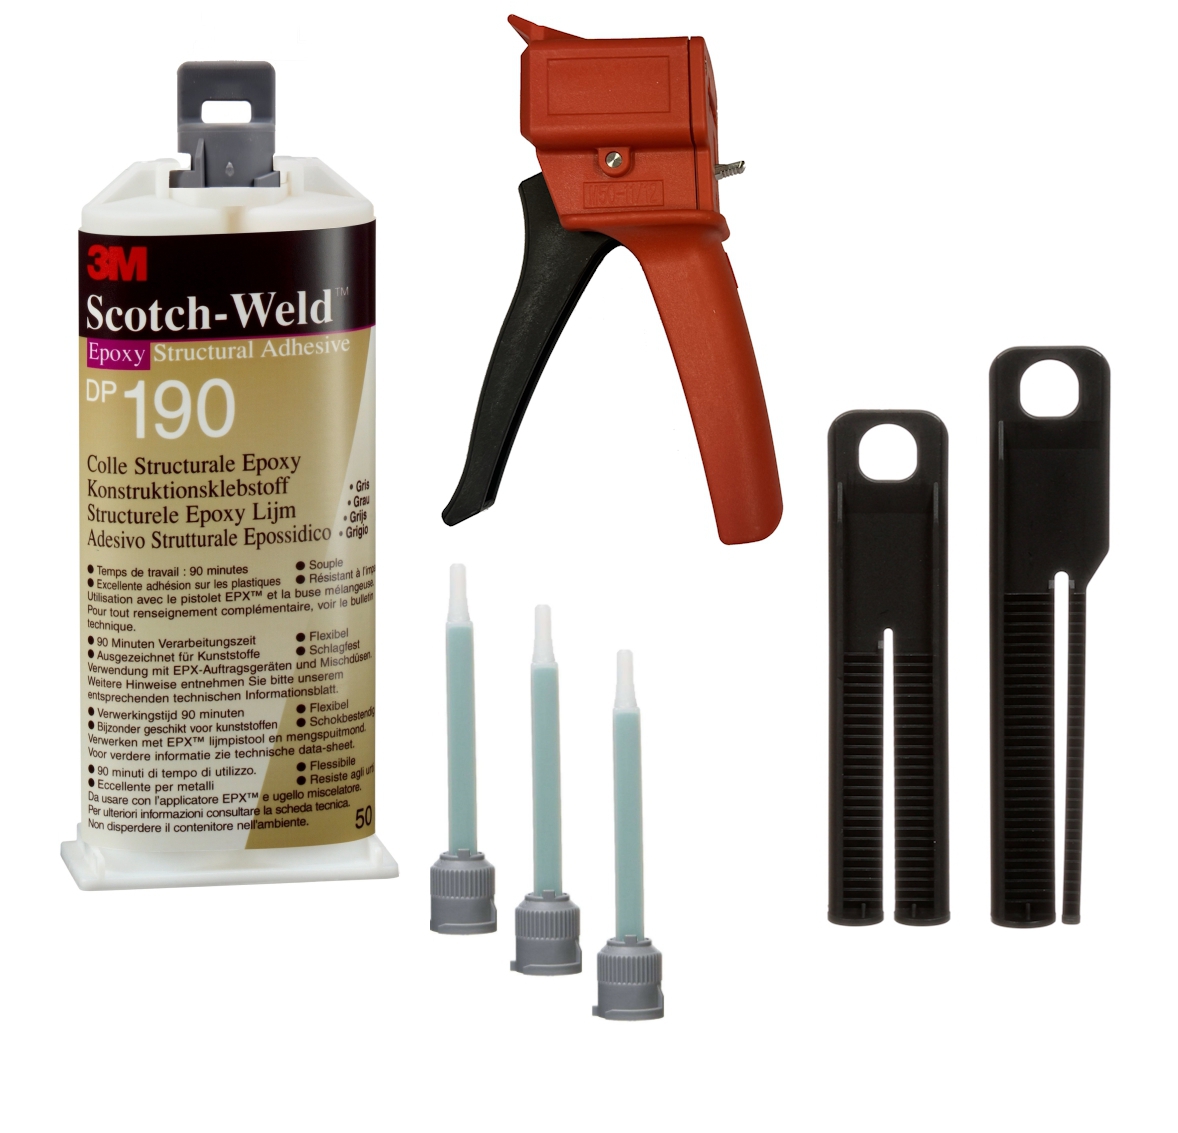 Starter set: 1x 3M Scotch-Weld 2-component construction adhesive EPX System DP190, gray, 50 ml, 1x S-K-S hand tool for EPX 38 to 50 ml cartridges incl. feed piston 2:1